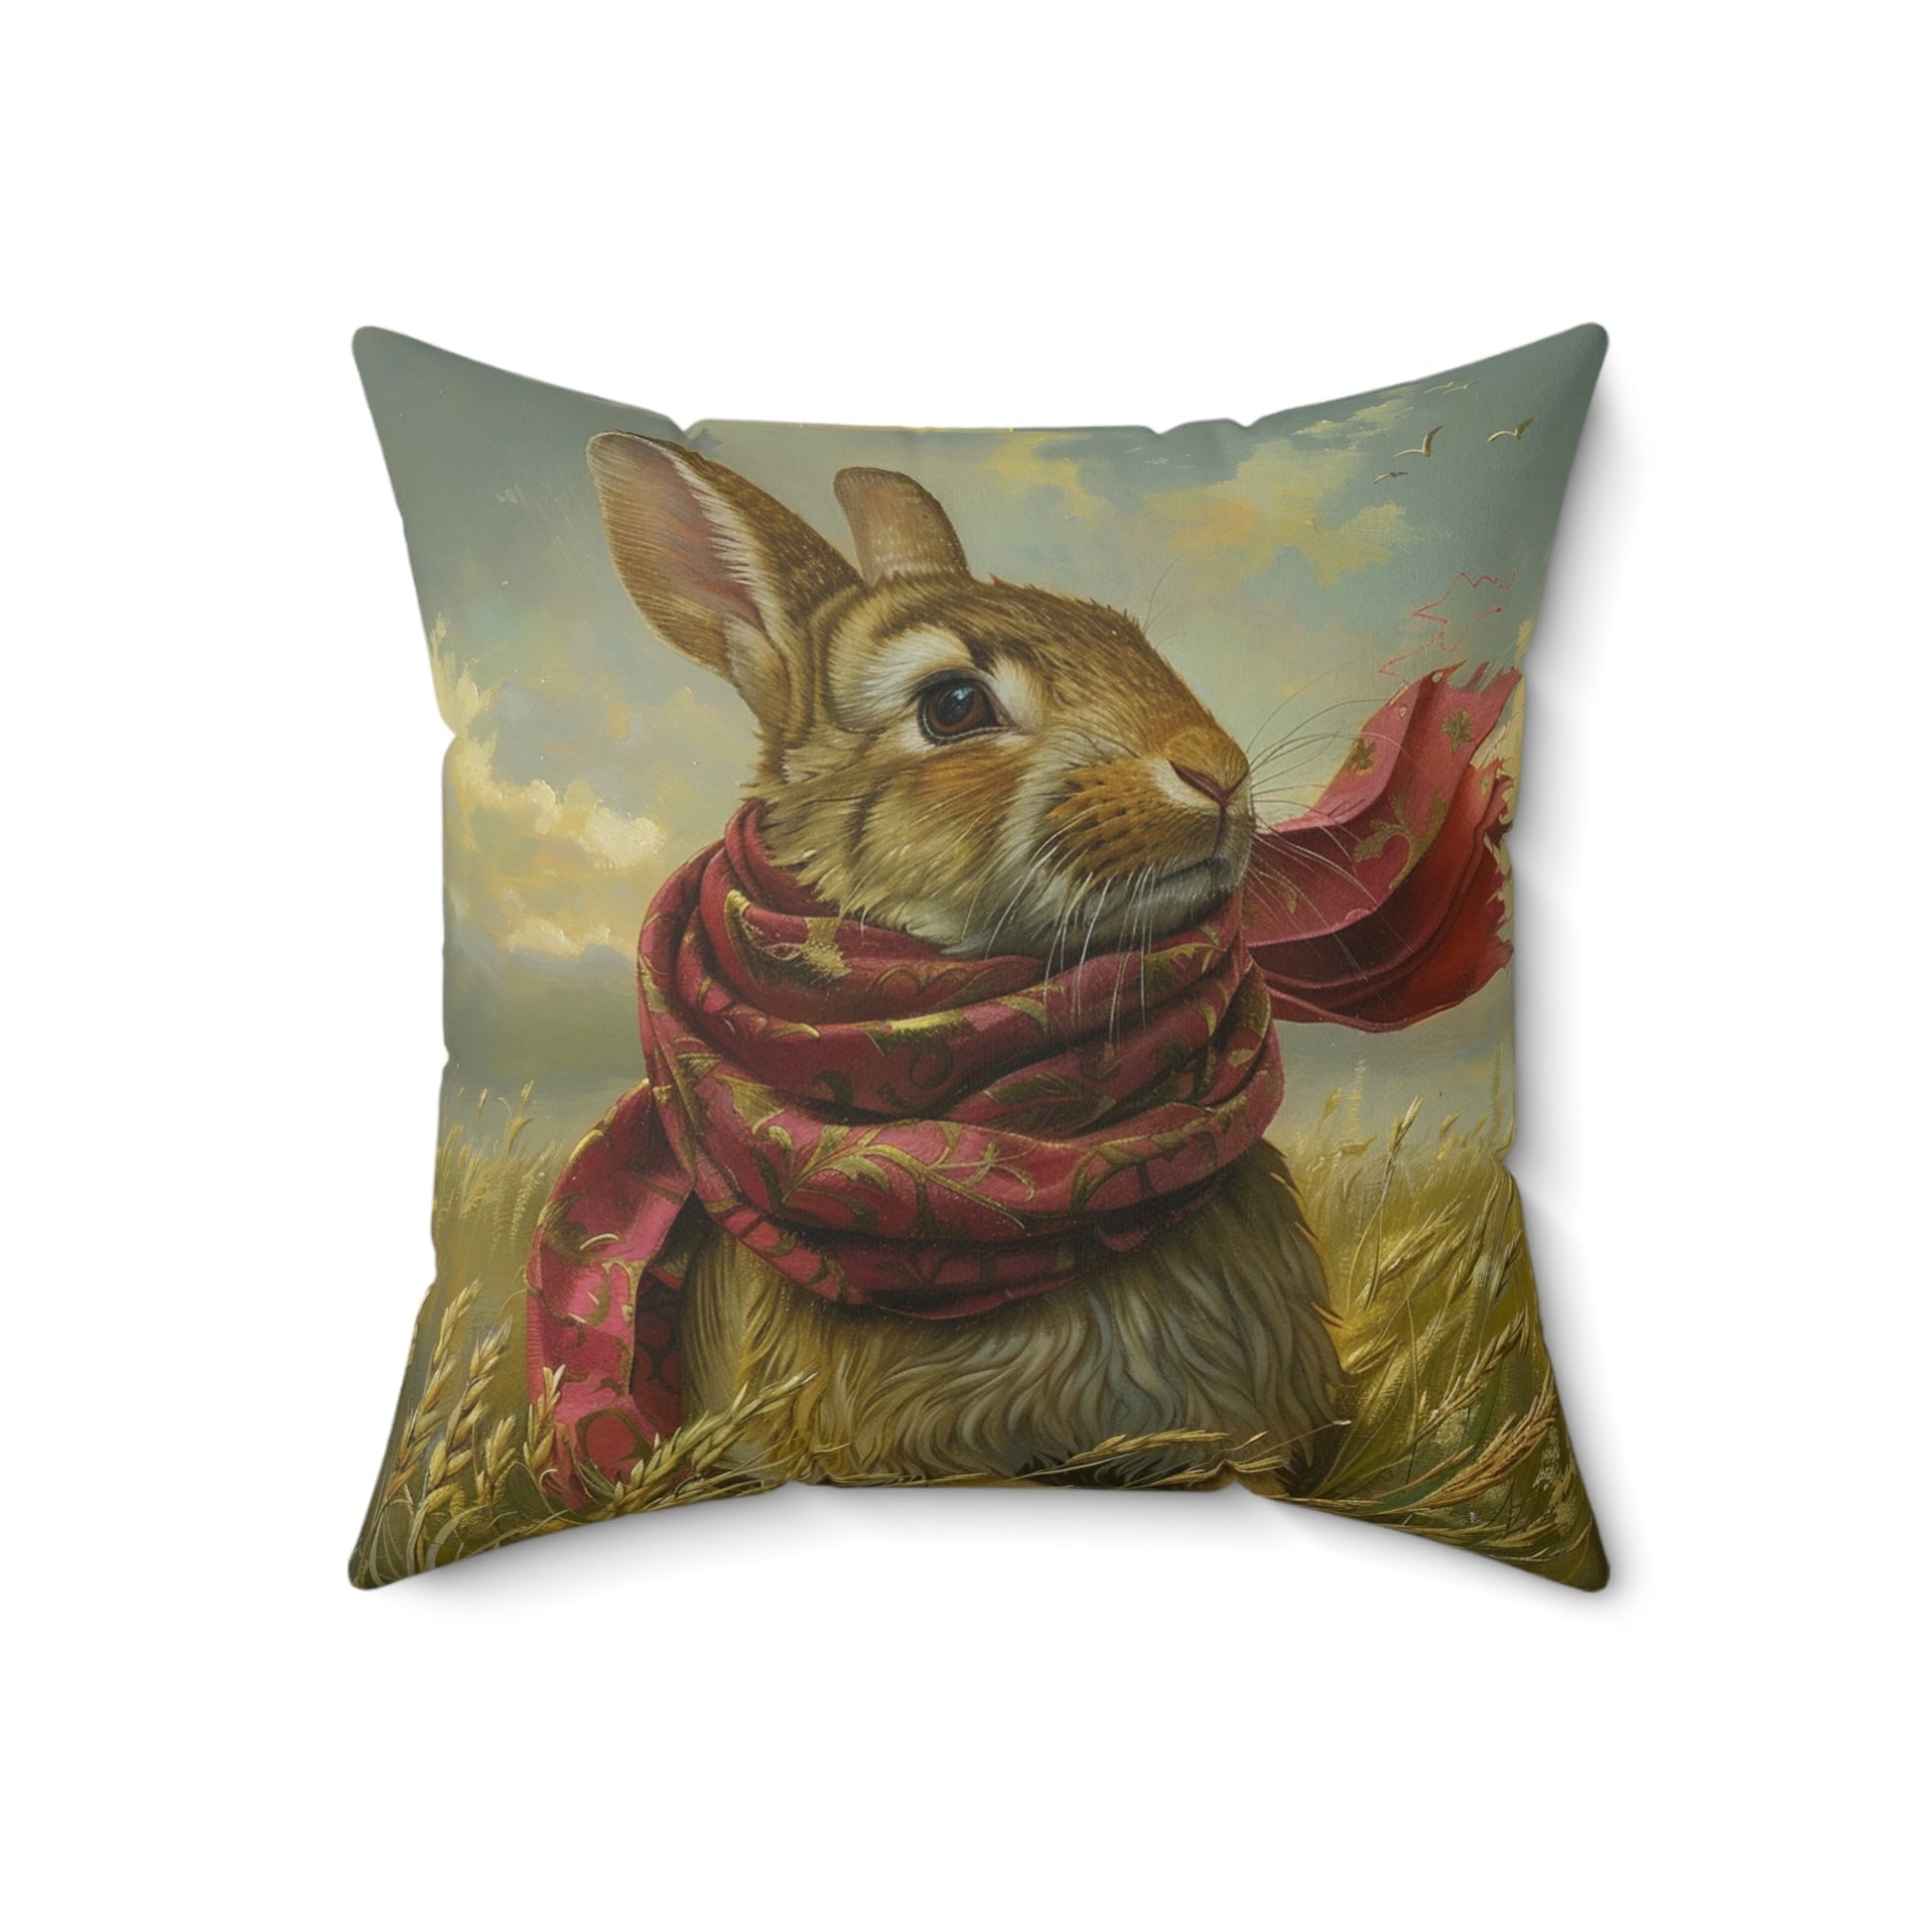 Enchanting Rabbit in Wildflowers - Whimsical, Magical, and Beautiful Home Decor - FlooredByArt